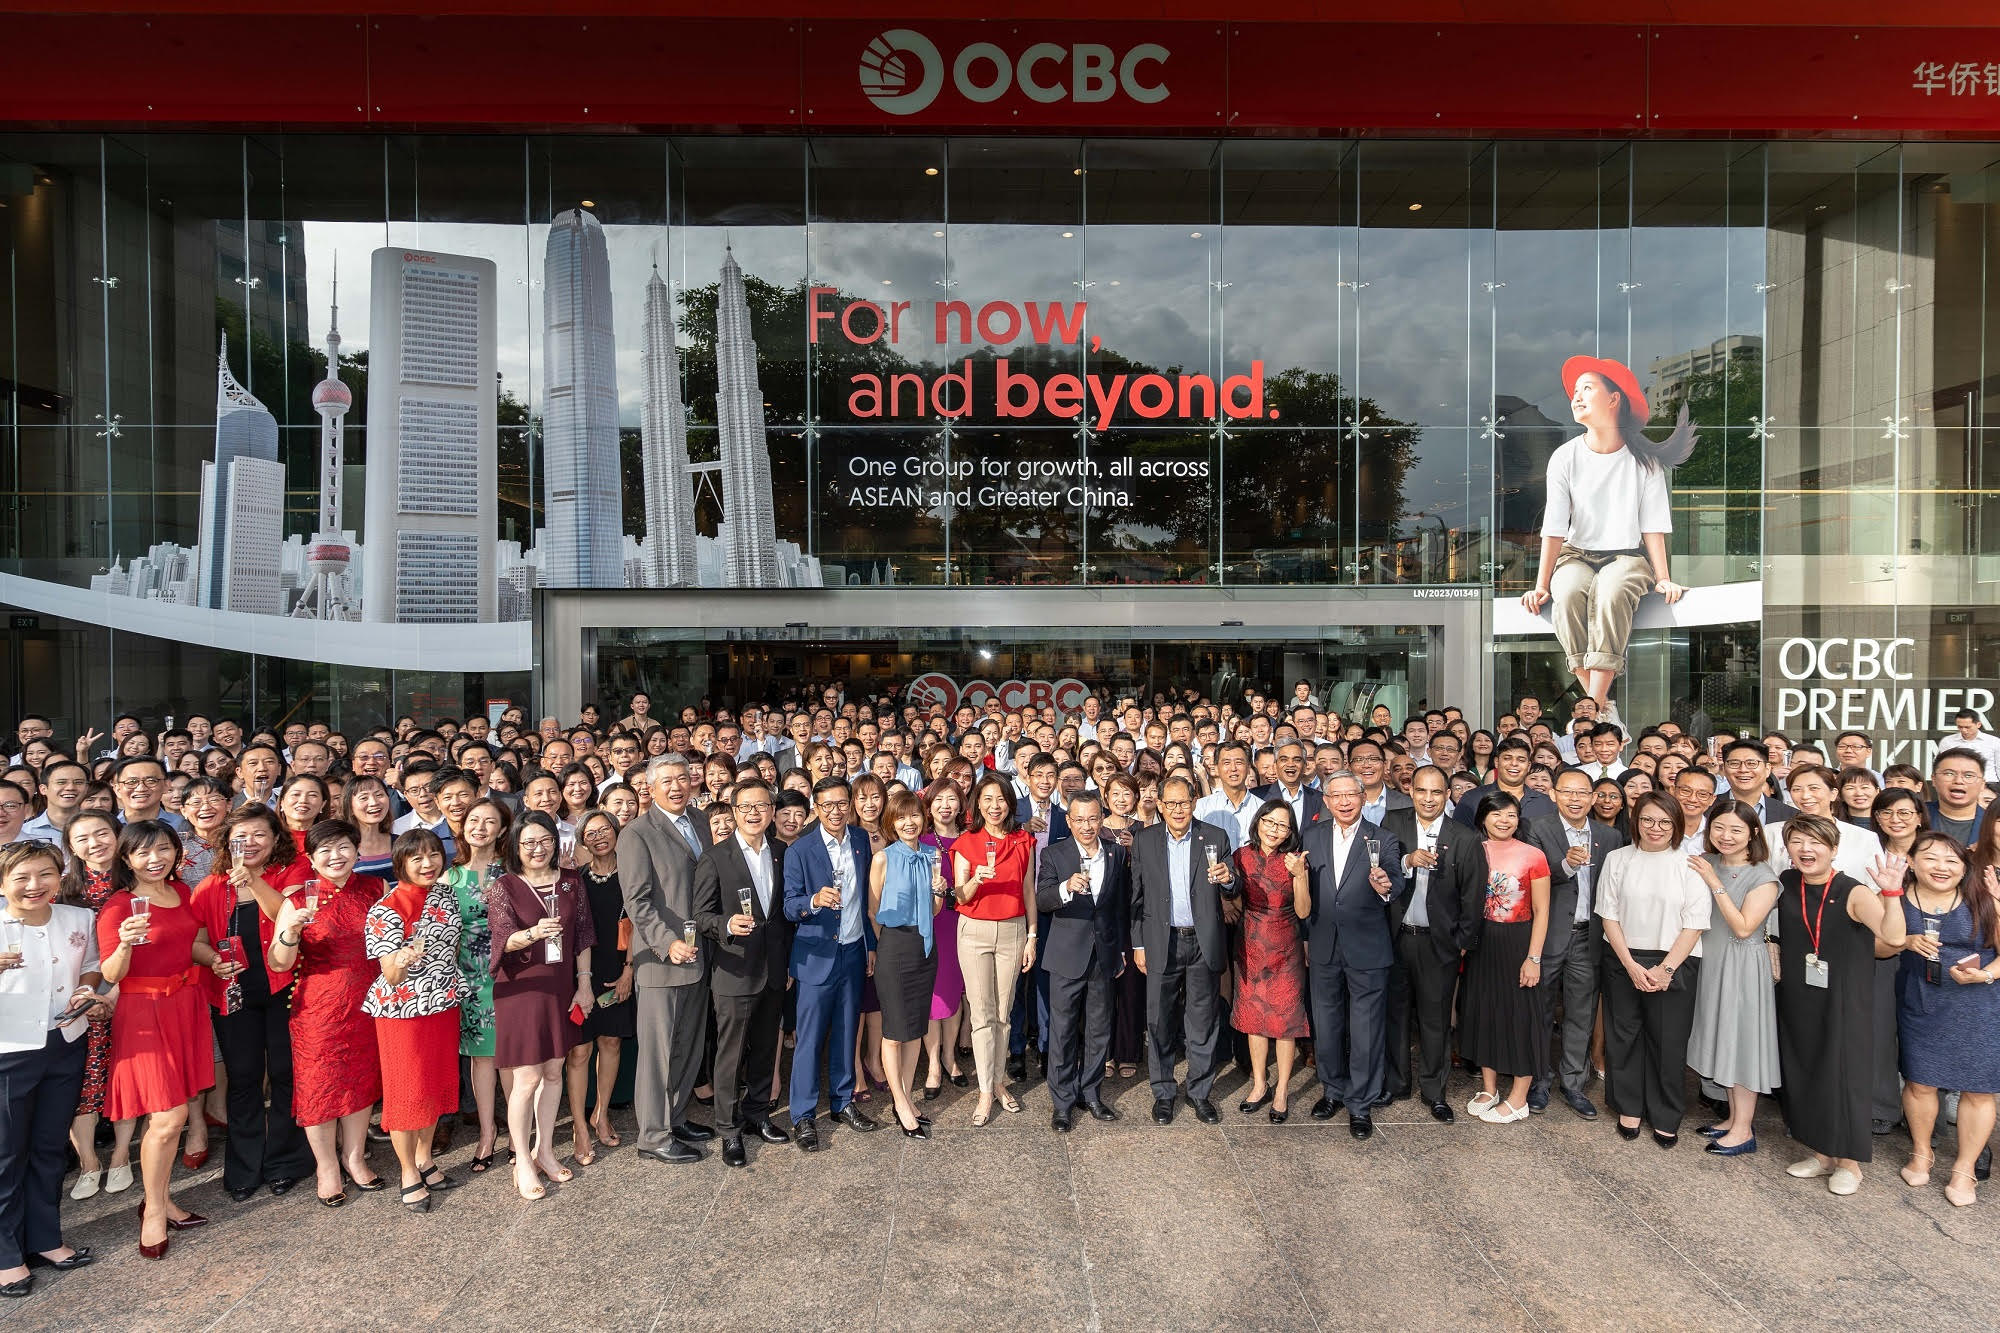 OCBC unifies brand, solidifying One Group strategy to accelerate ASEAN-Greater China growth